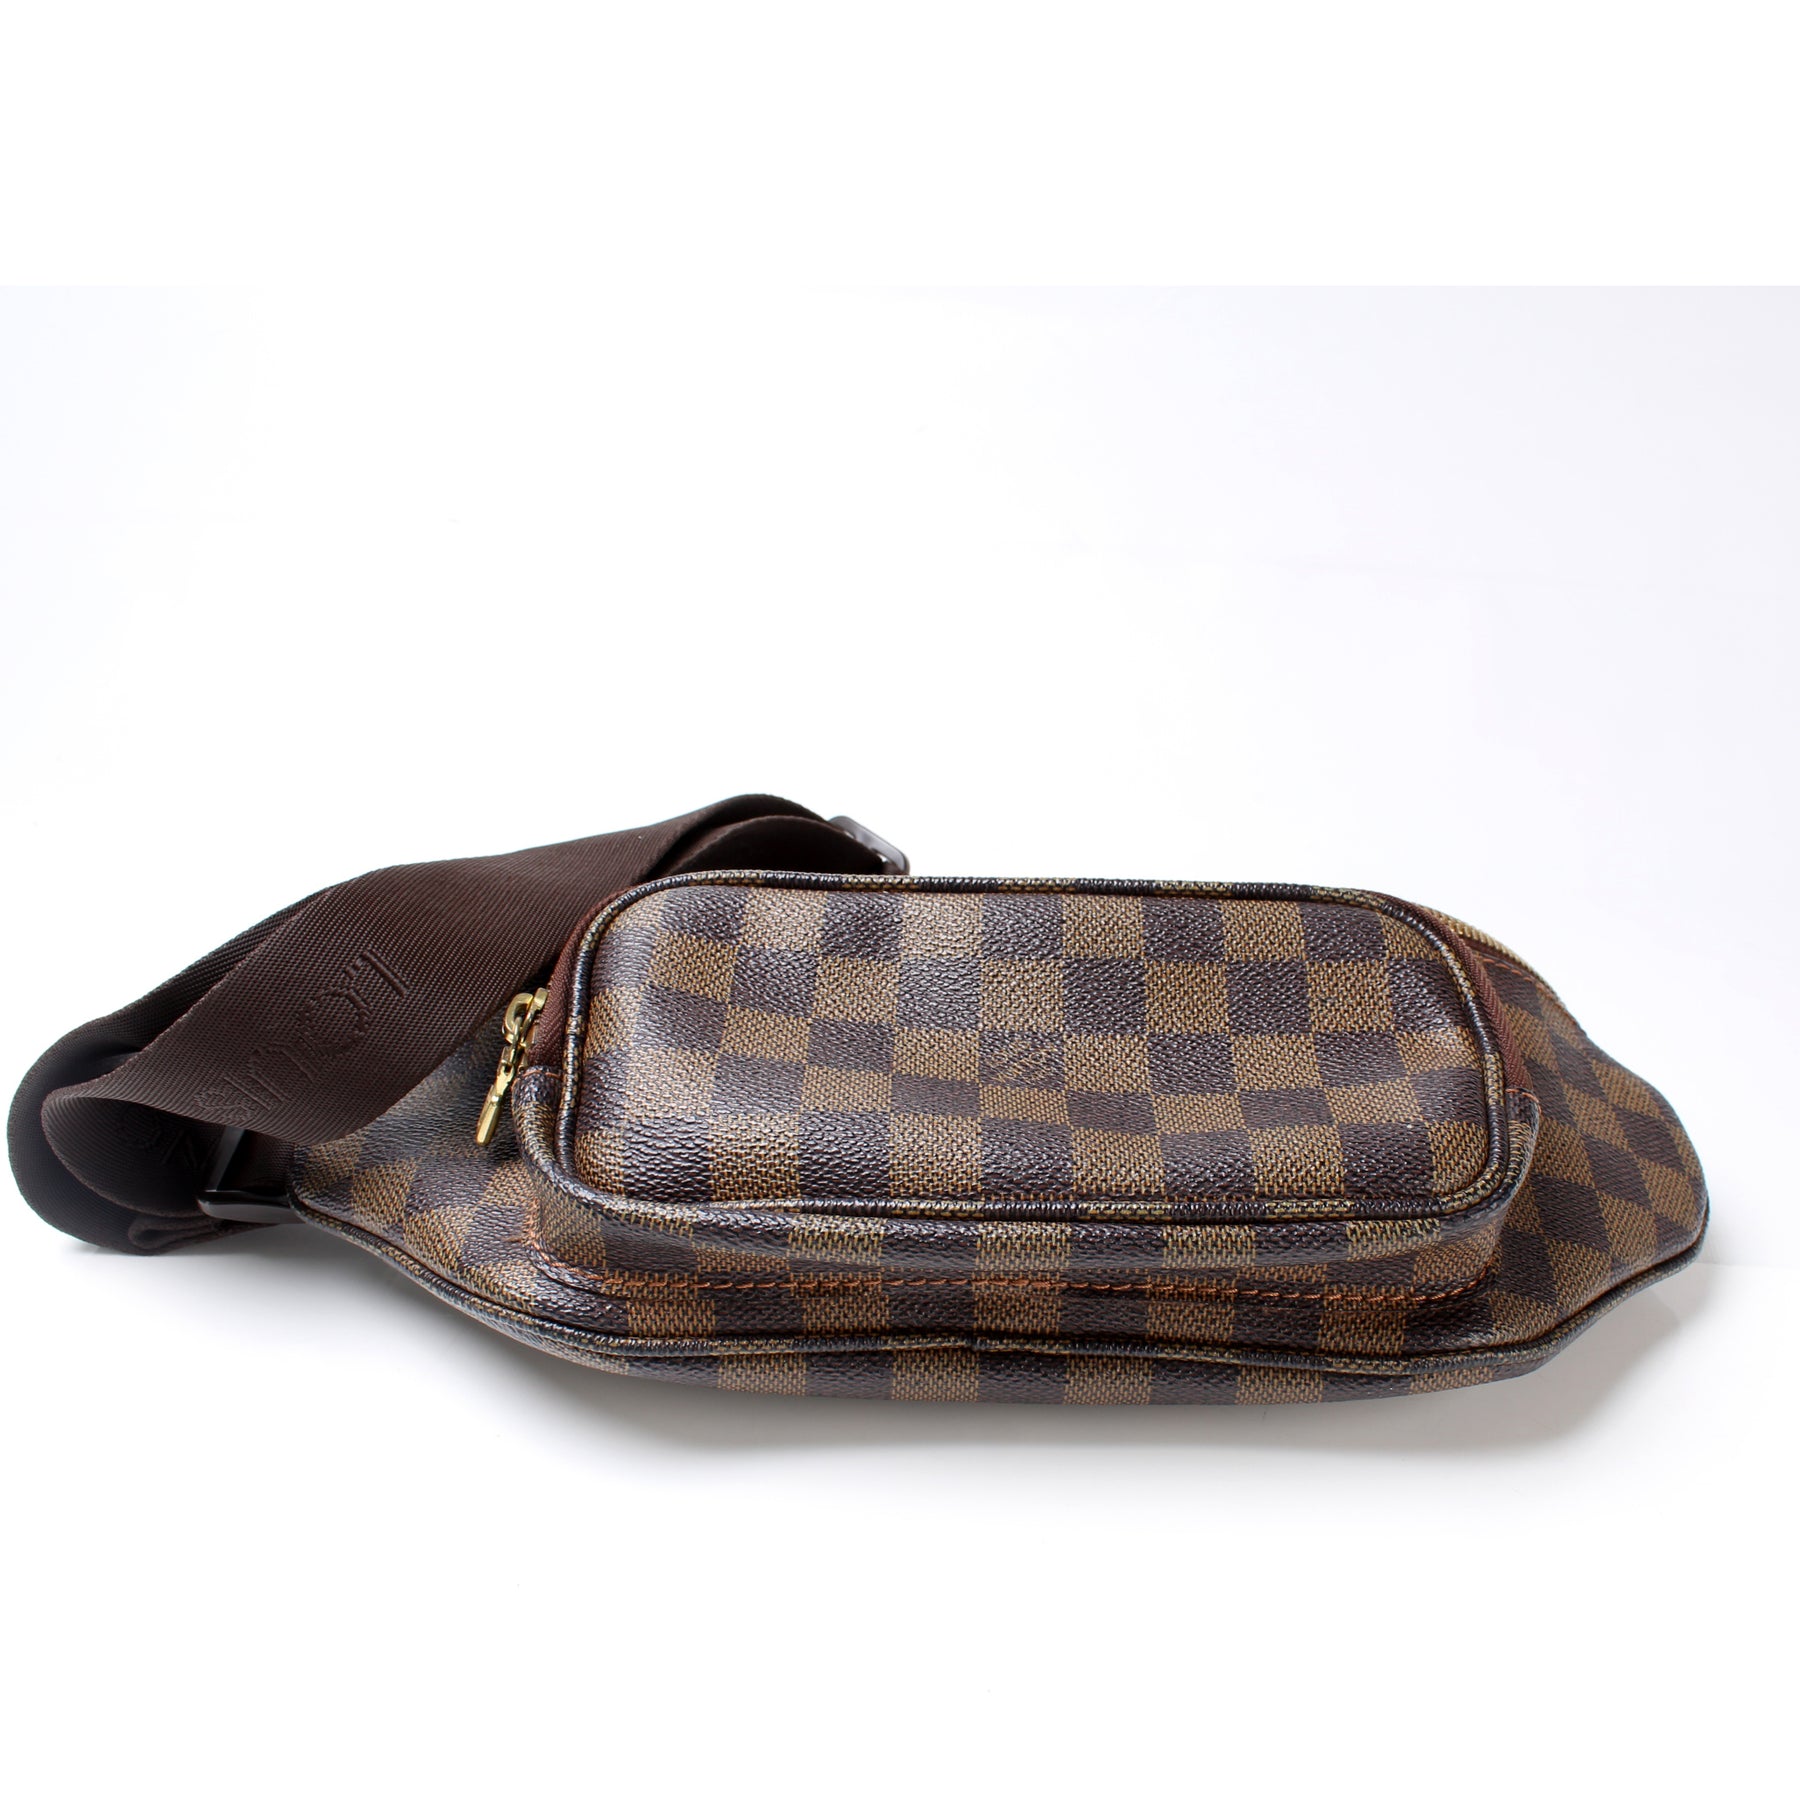 Buy [Used] LOUIS VUITTON Bum Bag Melville Body Bag Damier Leather Ebene  Brown N51172 from Japan - Buy authentic Plus exclusive items from Japan